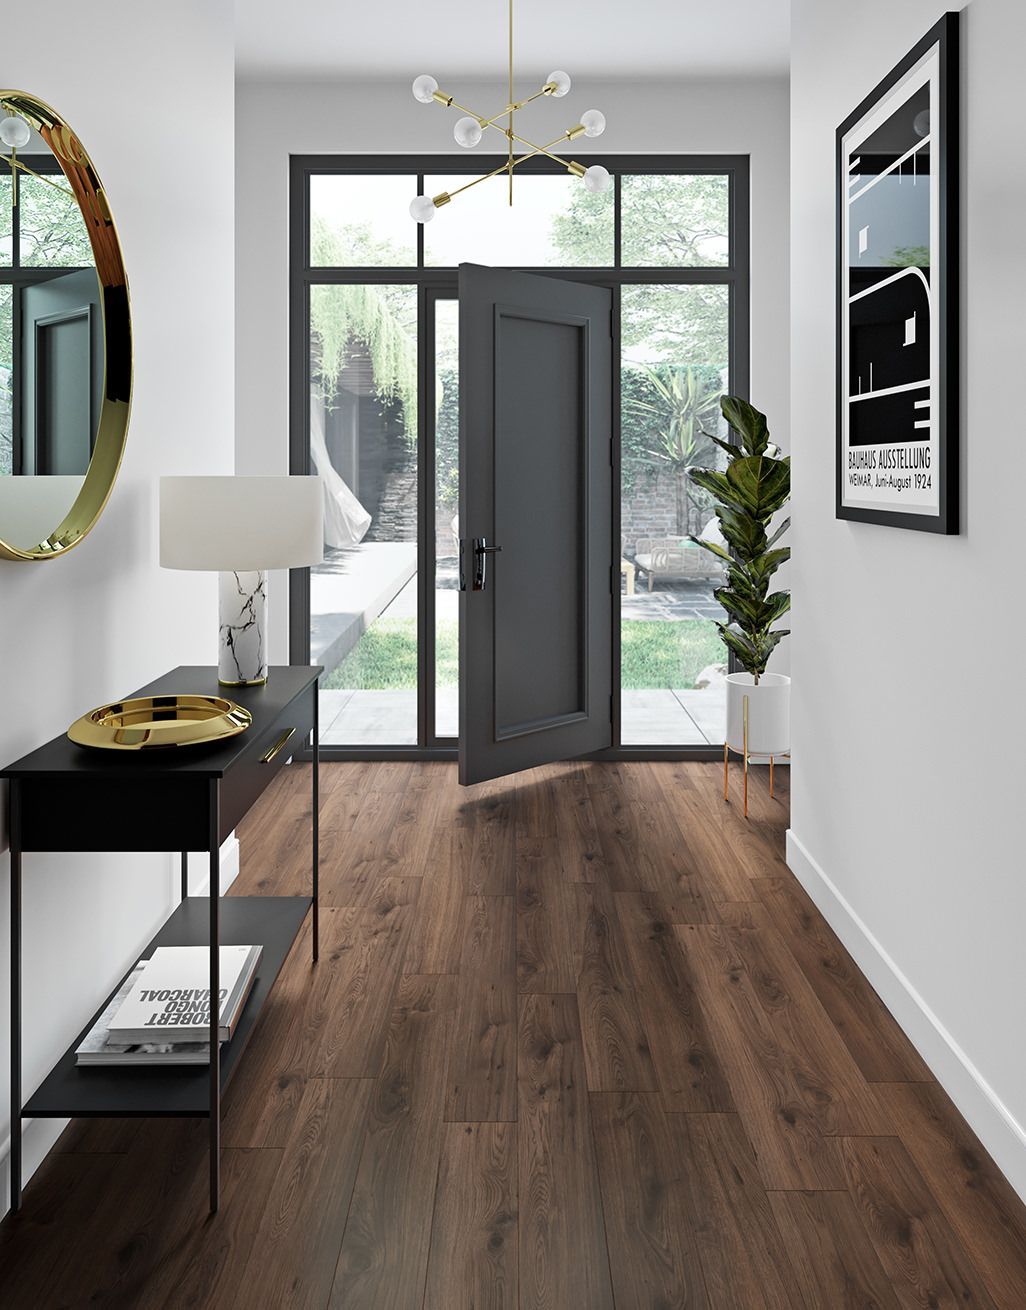 Transform Your Space with Laminate
Flooring: A Complete Guide